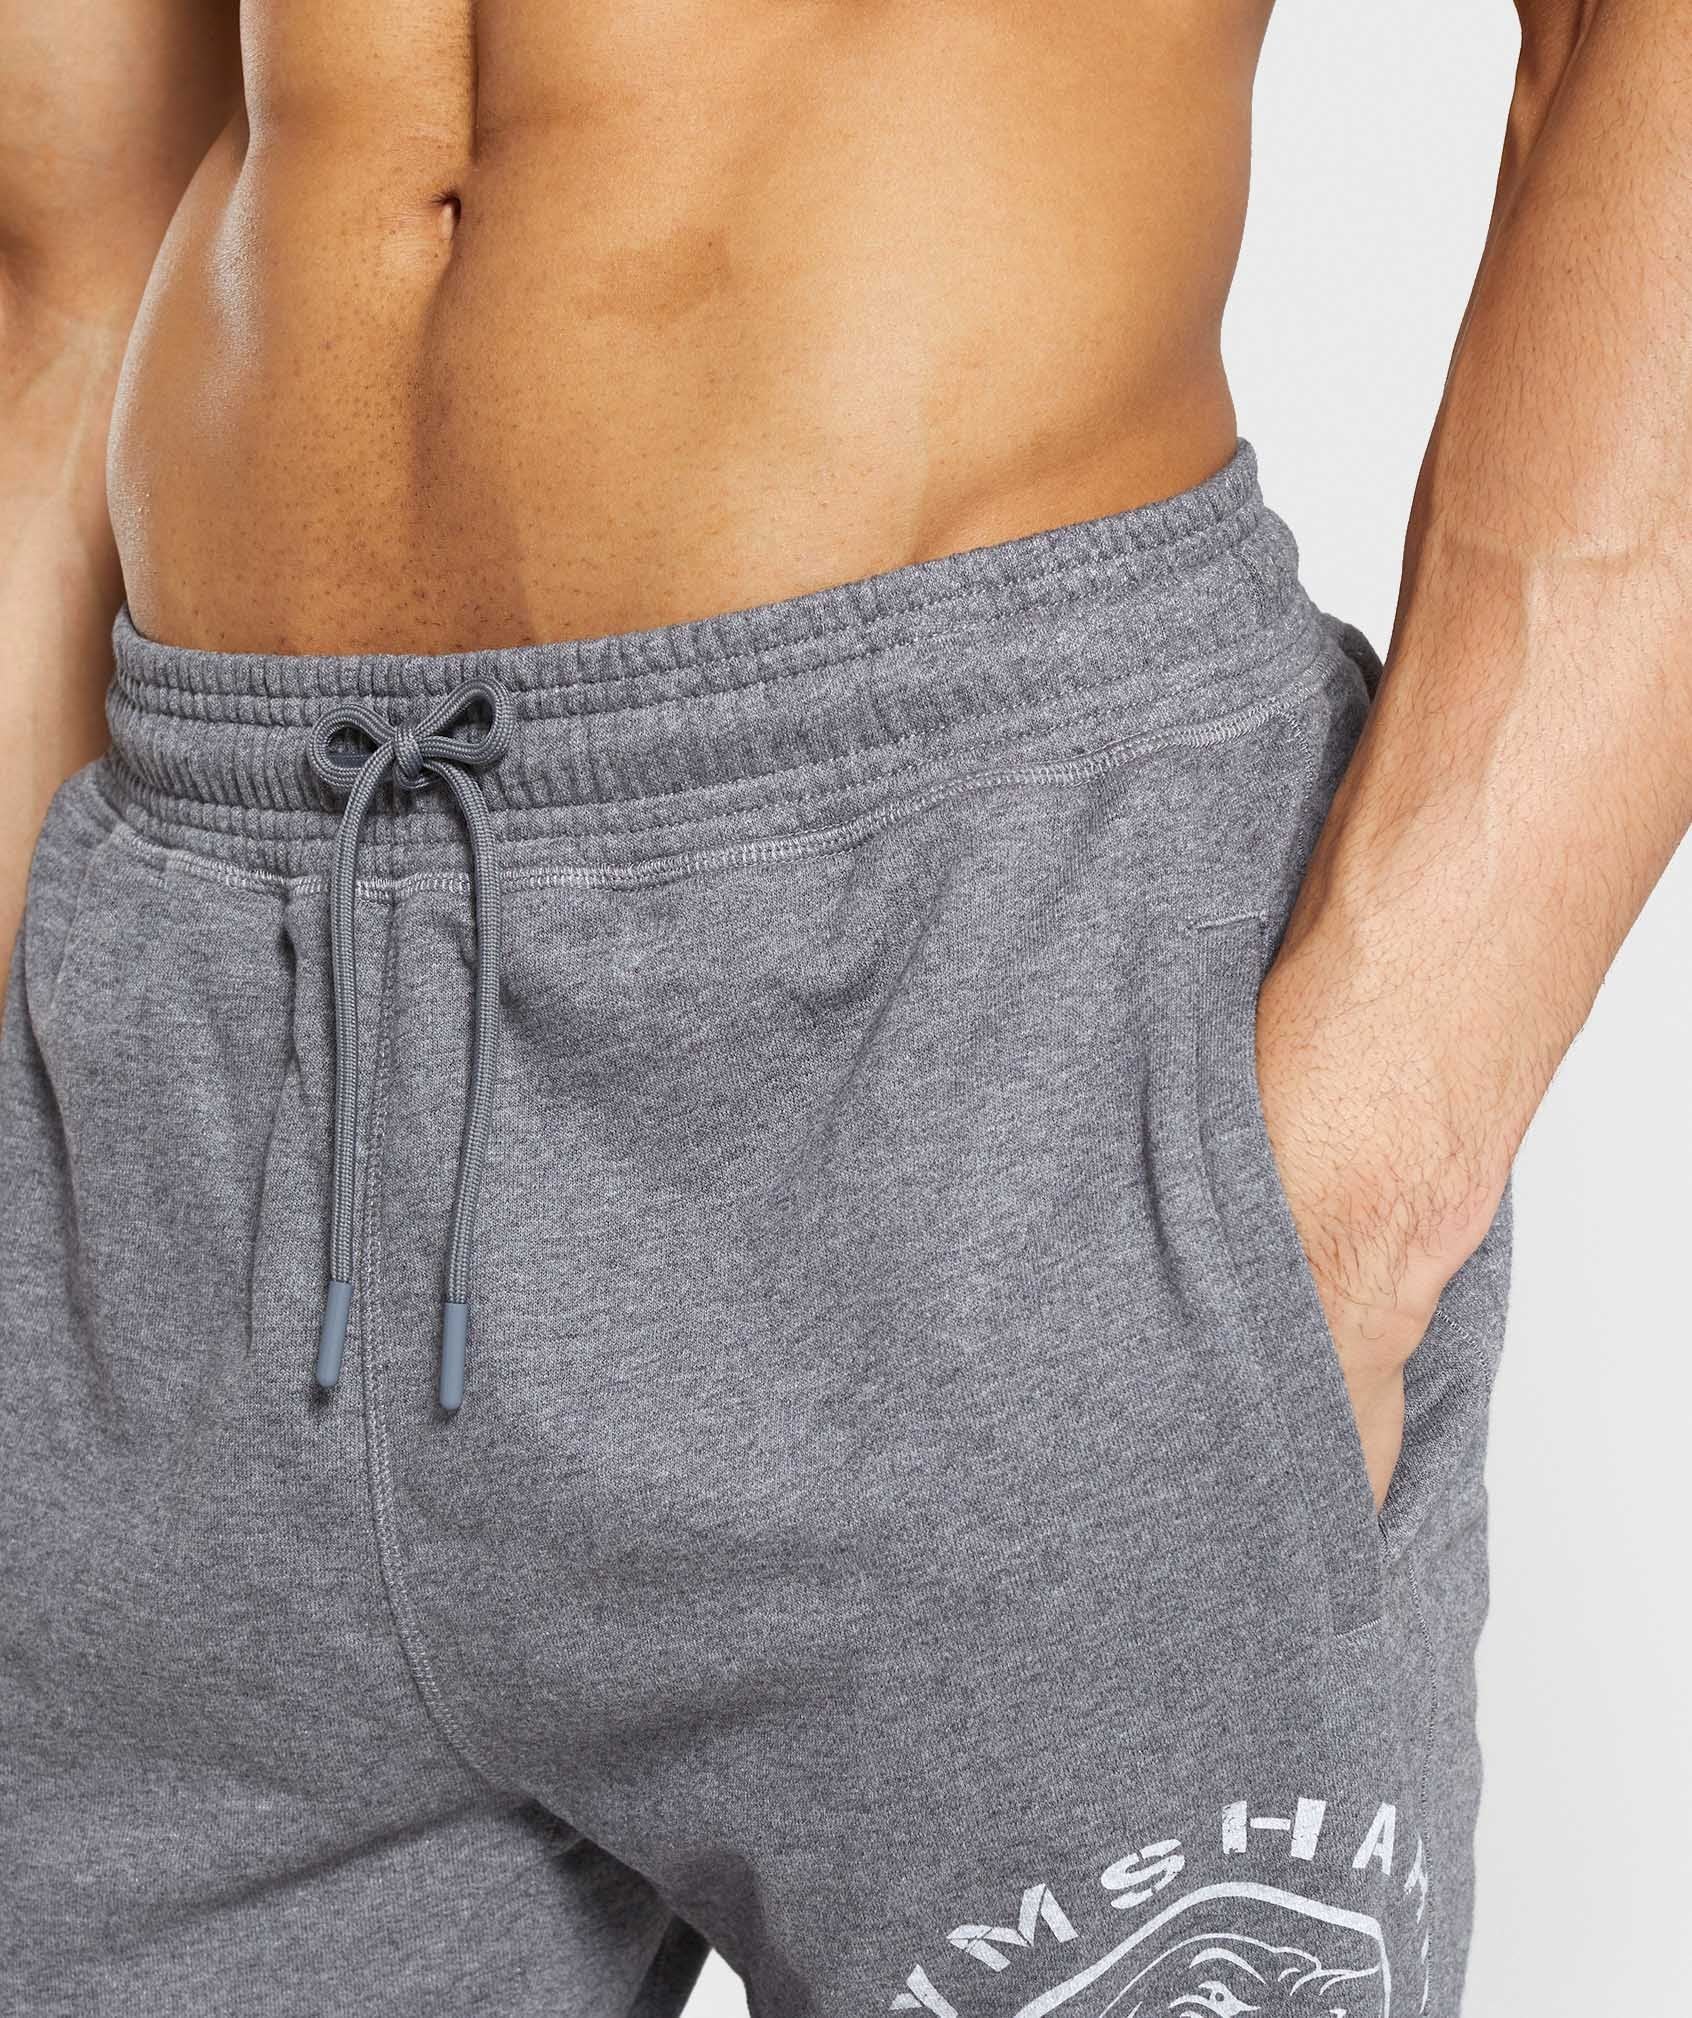 Legacy Plus Shorts in Grey - view 6